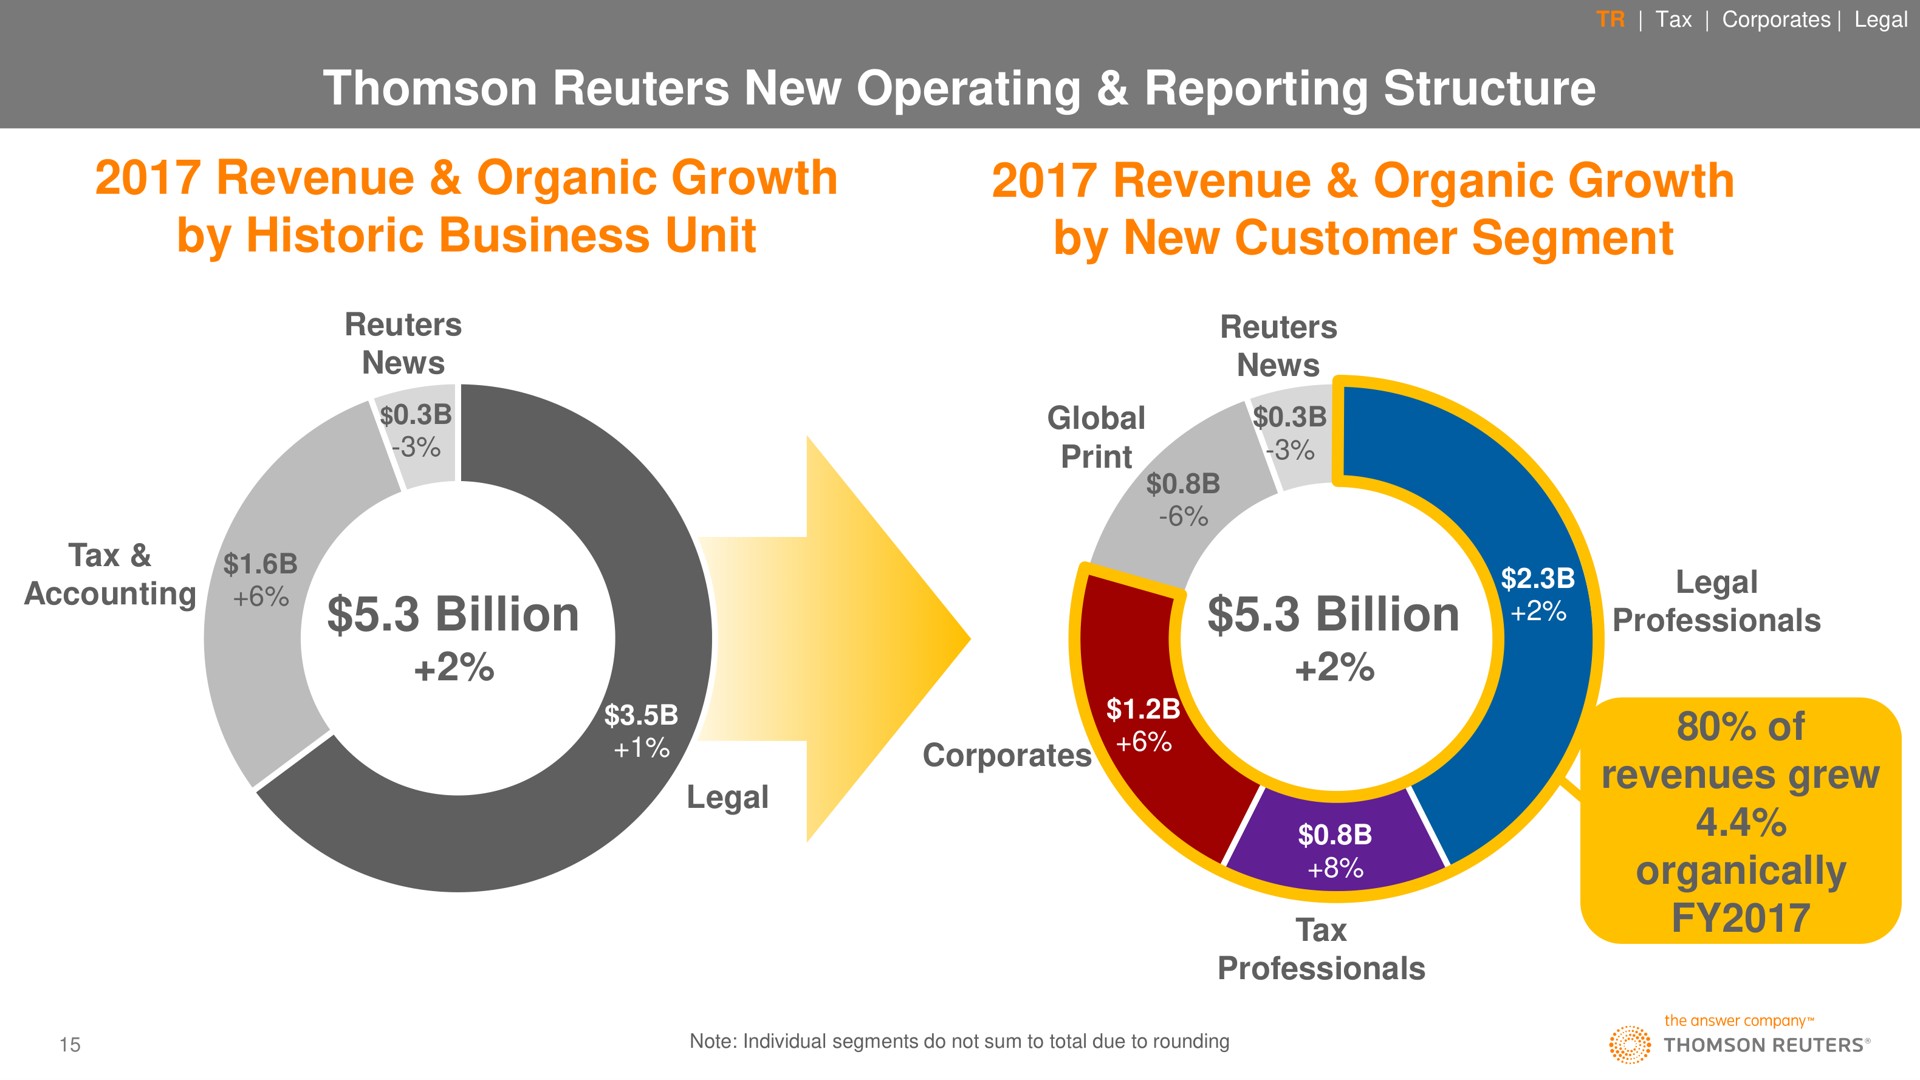 new operating reporting structure revenue organic growth by historic business unit revenue organic growth by new customer segment billion billion of revenues grew organically print tax | Thomson Reuters